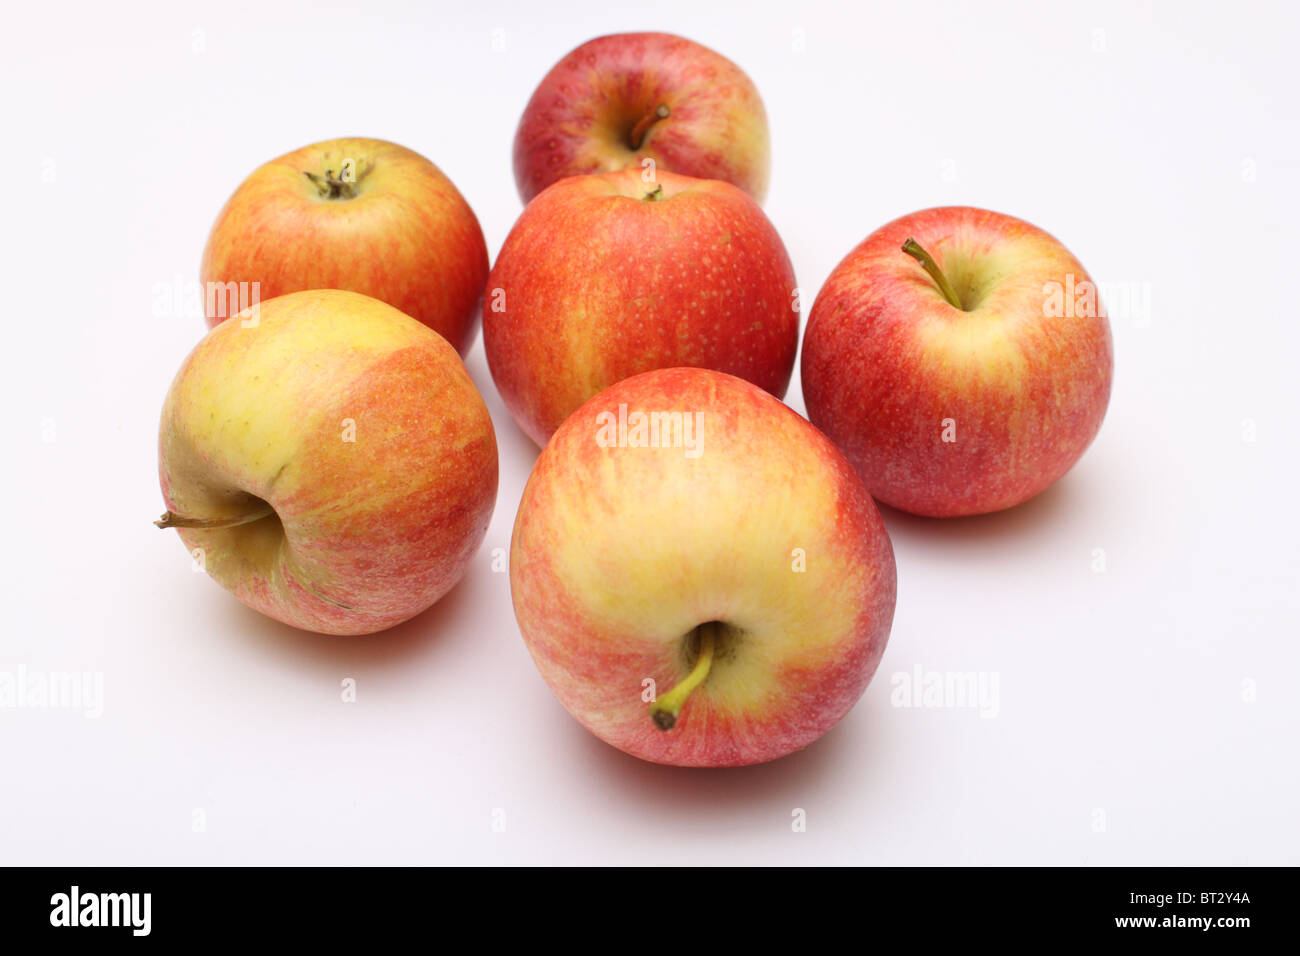 Apples are red on a white background, ripe, garden, grown in Germany Stock Photo